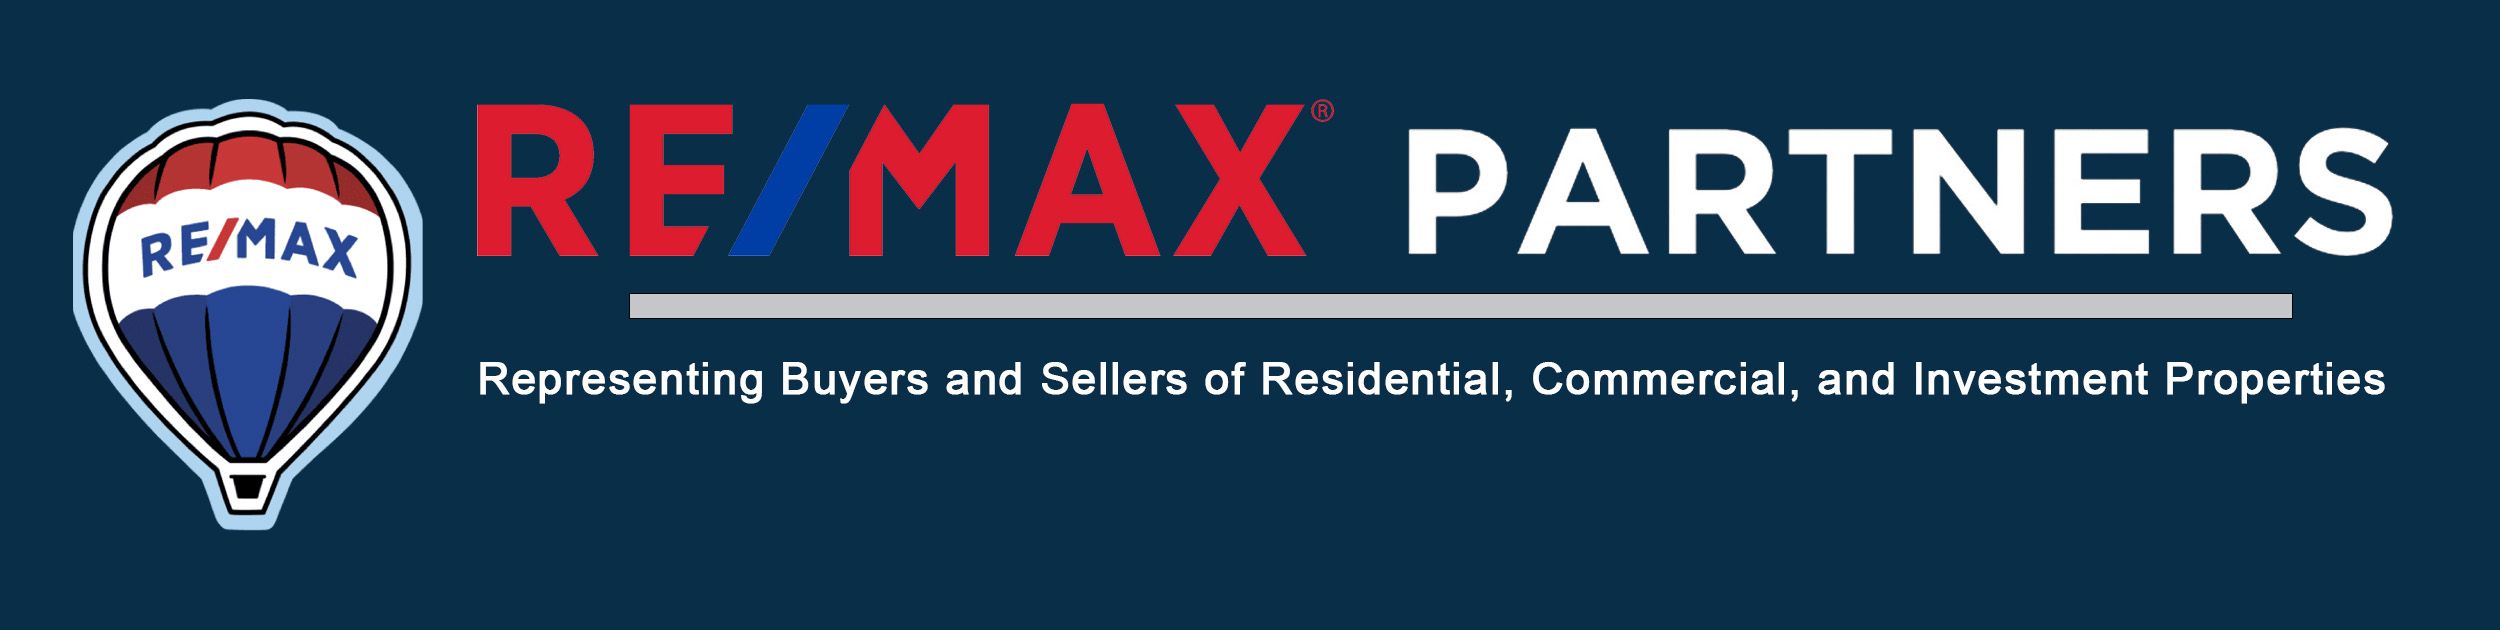 remax balloon logo with office information